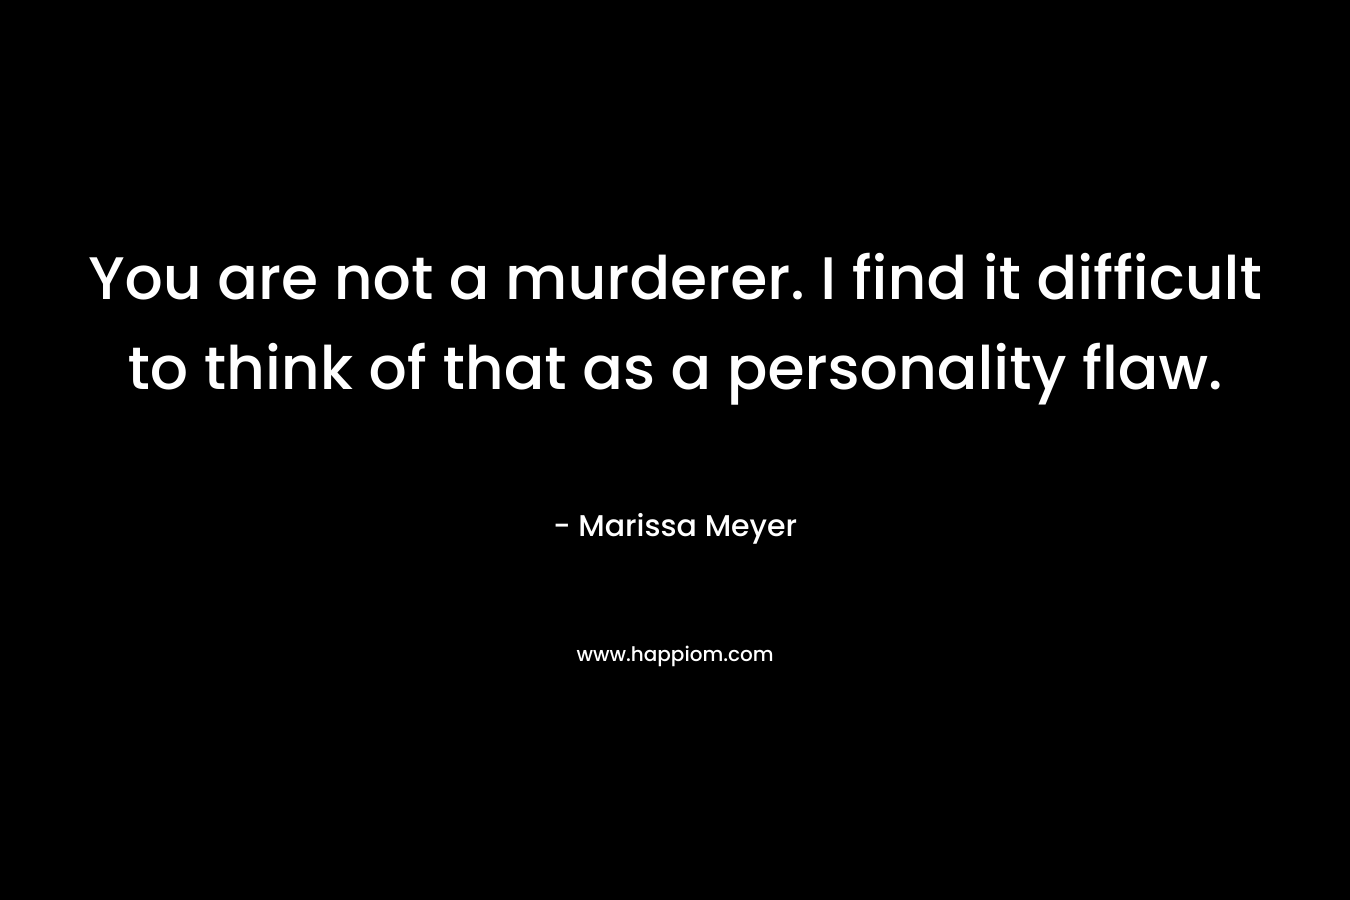 You are not a murderer. I find it difficult to think of that as a personality flaw. – Marissa Meyer